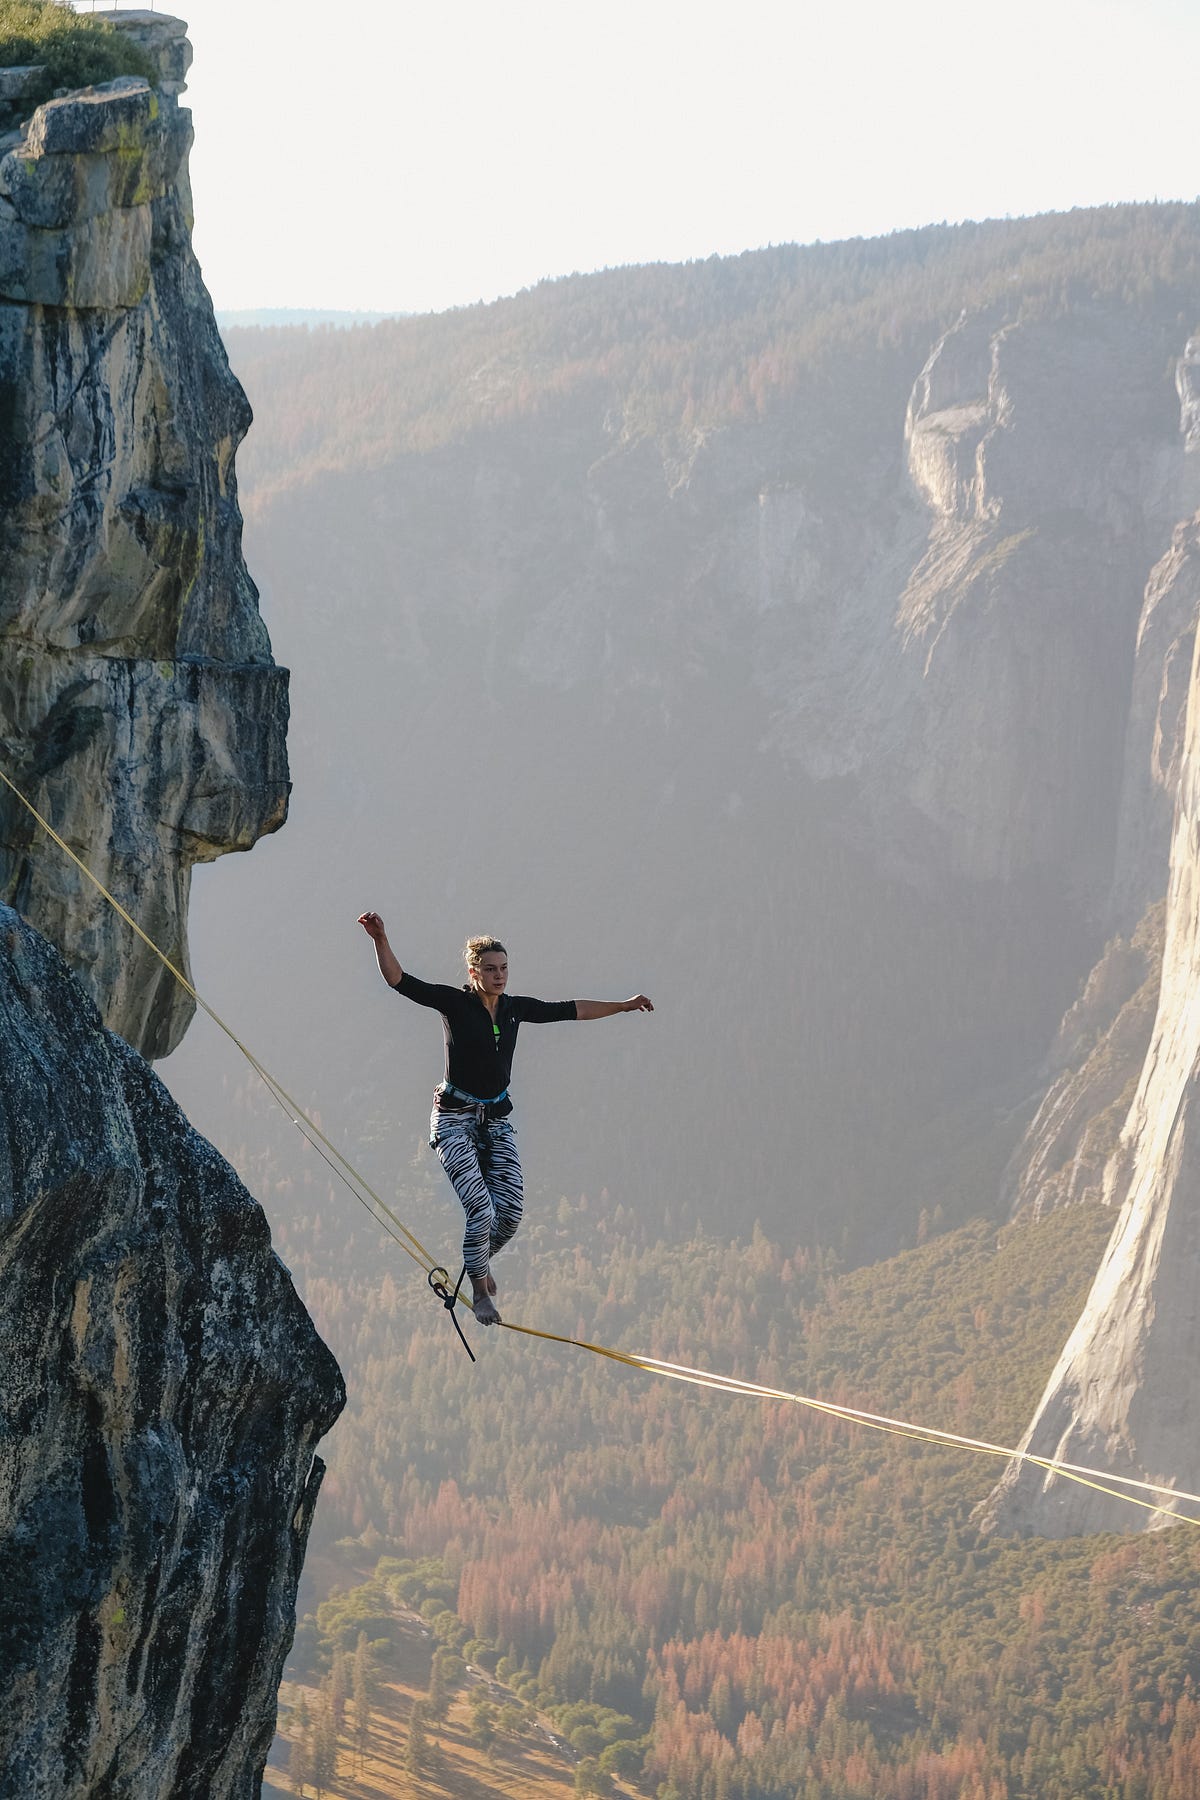 Extreme sports and business success go hand in hand